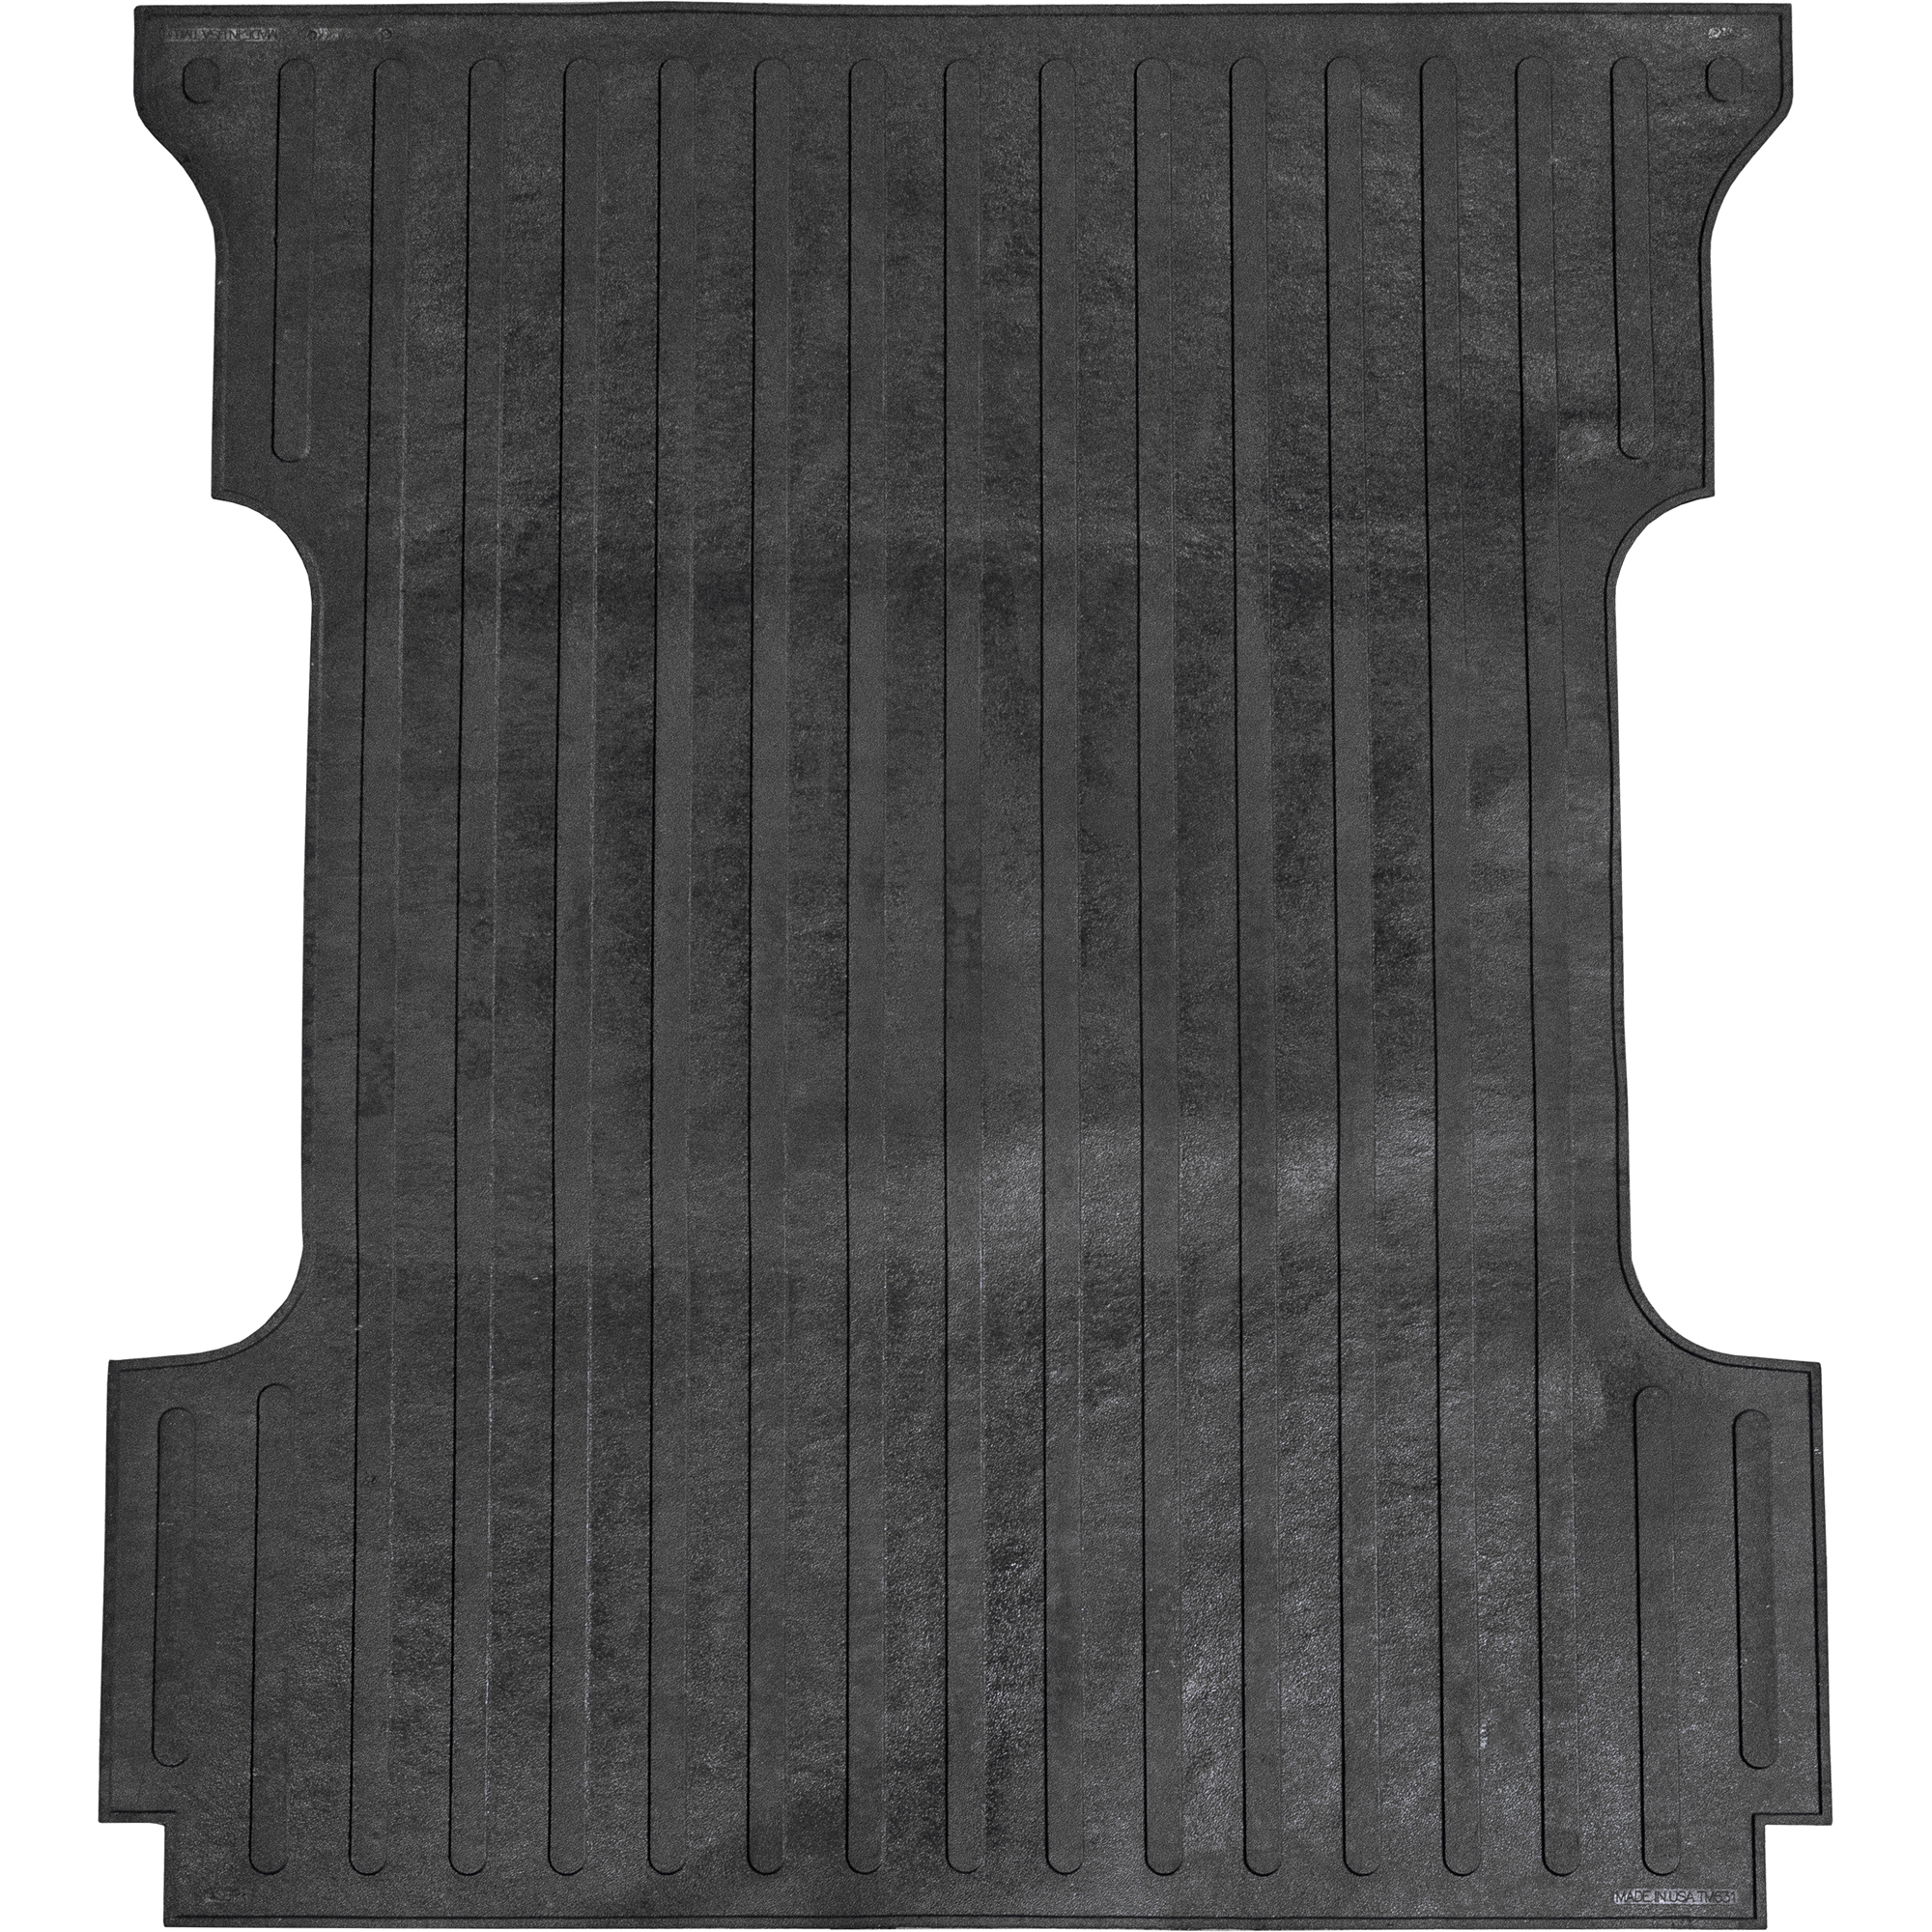 Boomerang Rubber, Ford F-250/F-350 Year 1999-2016 Bed Mat, Long Bed, 8ft. Long, Primary Color Black, Model TM565BAGGED